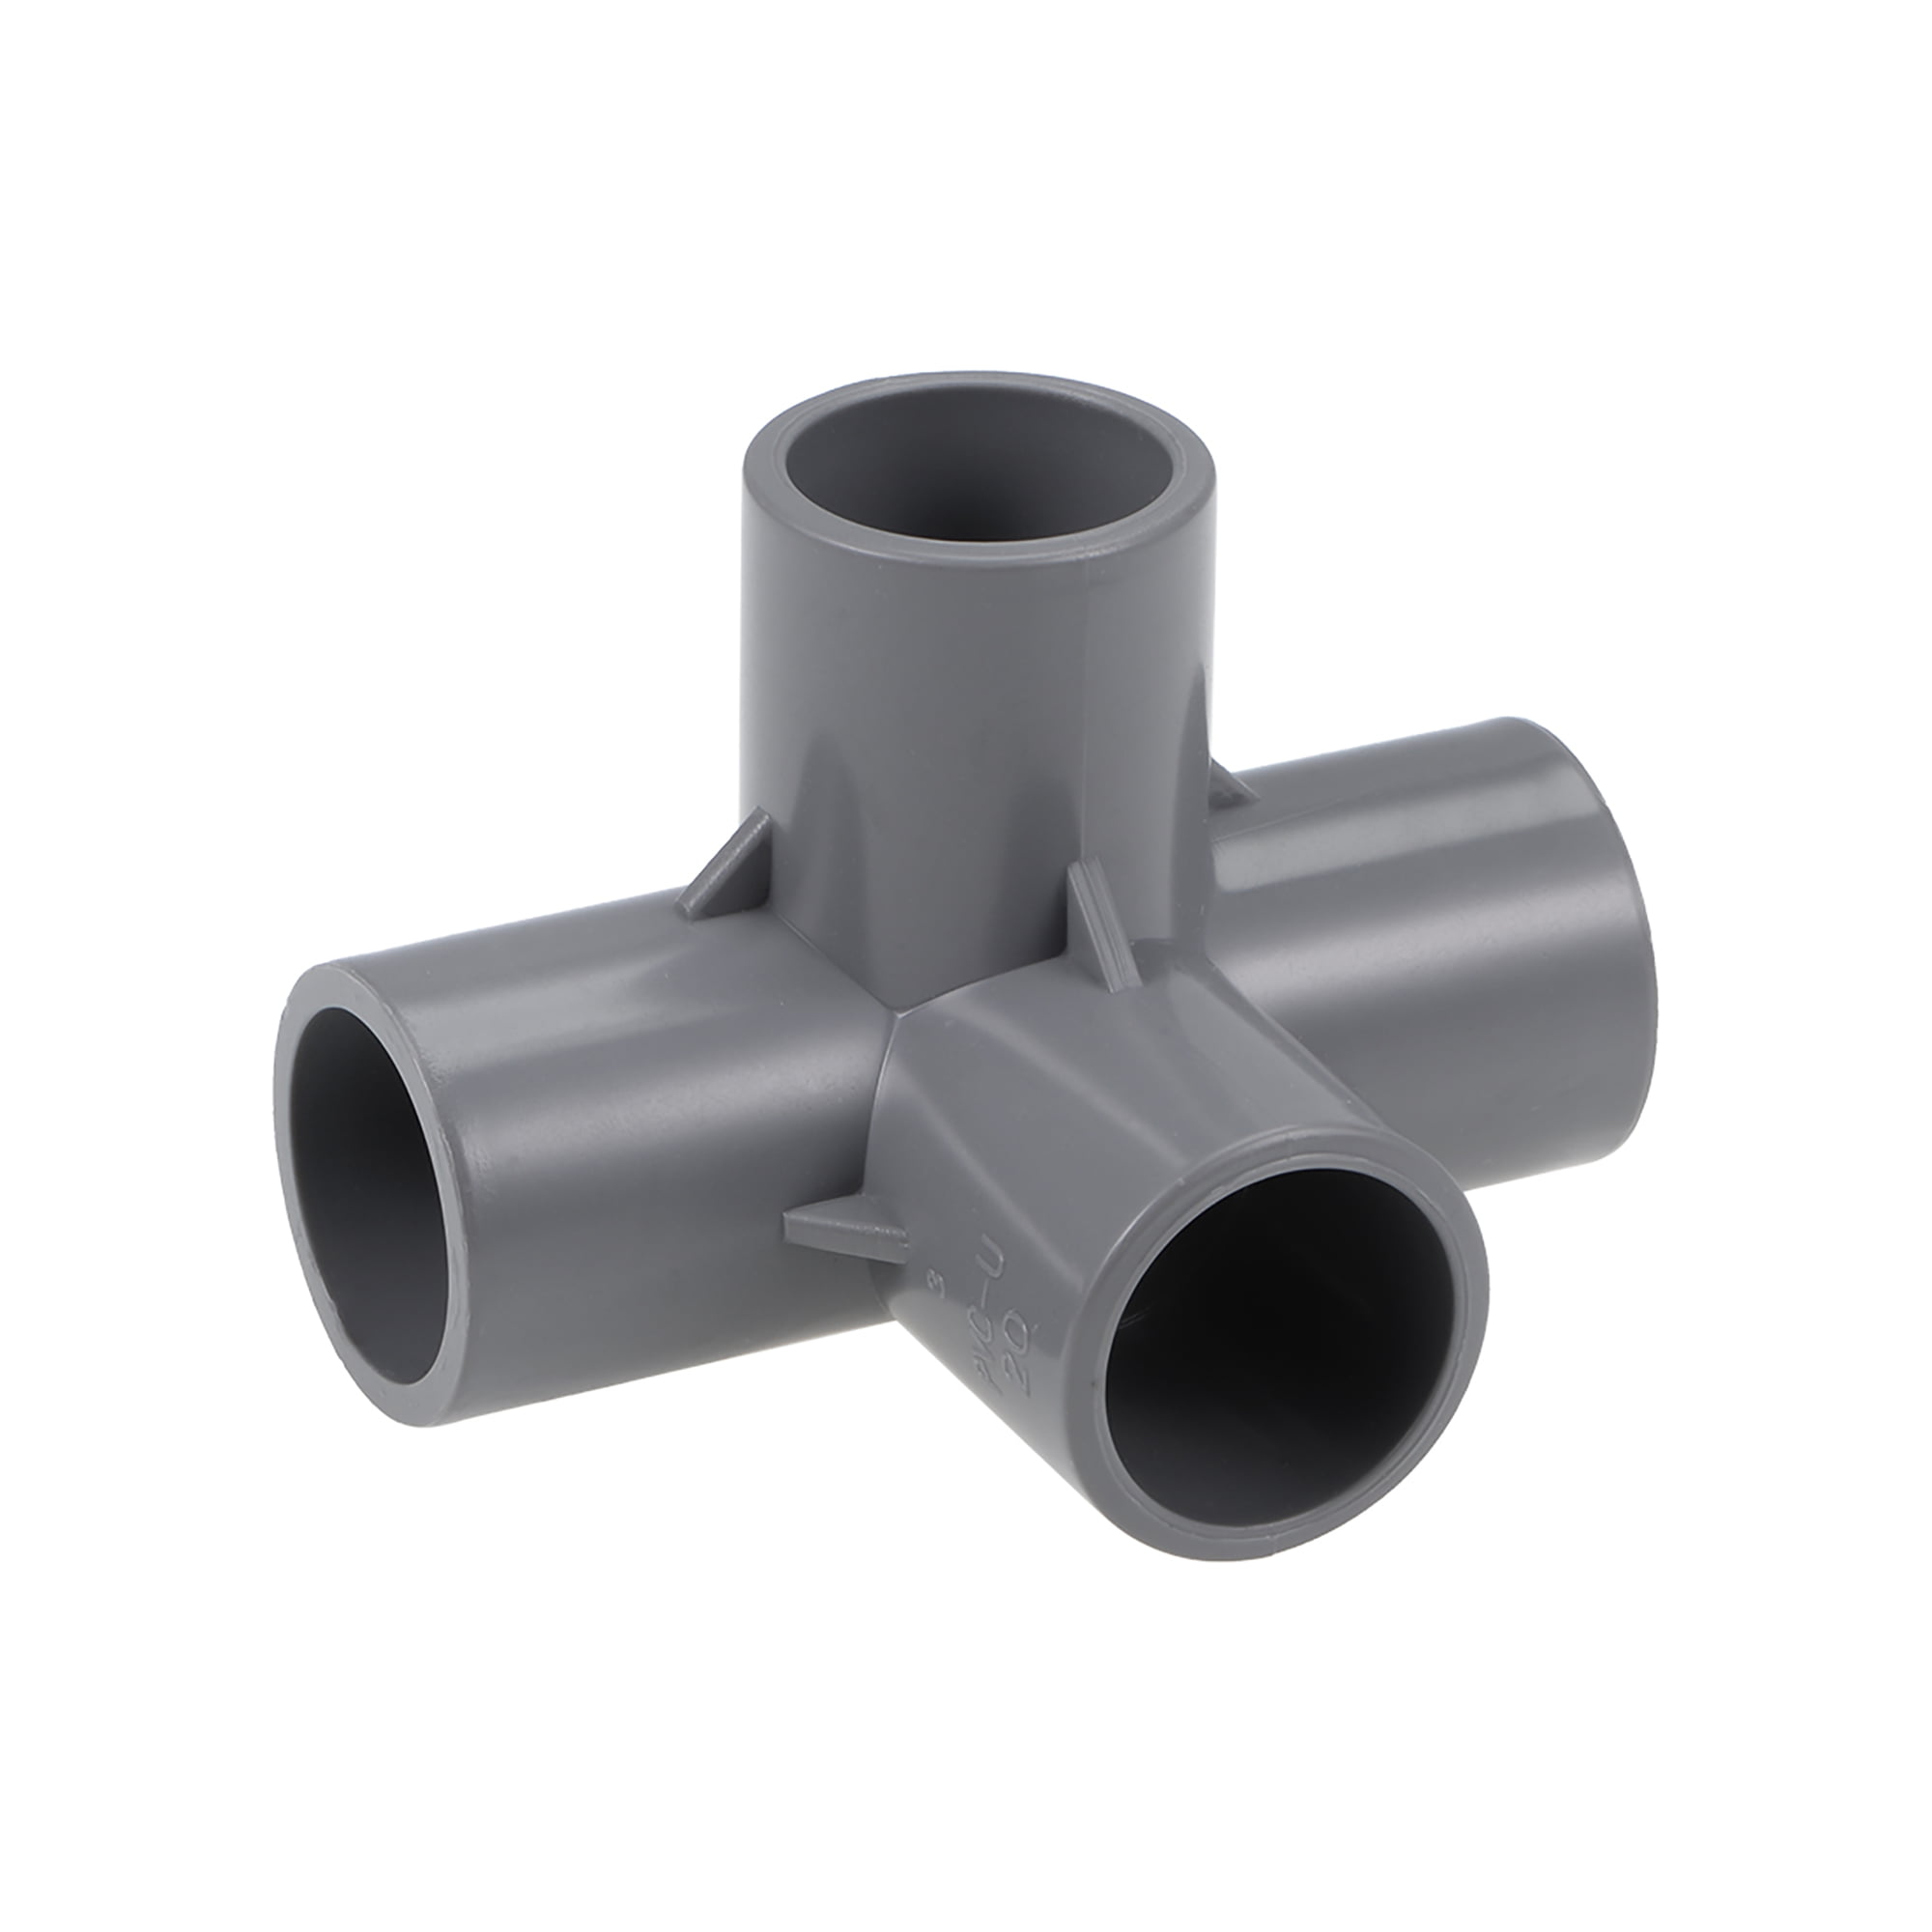 4-Way Elbow PVC Pipe Fitting,Furniture Grade,1/2-inch Size Tee Corner